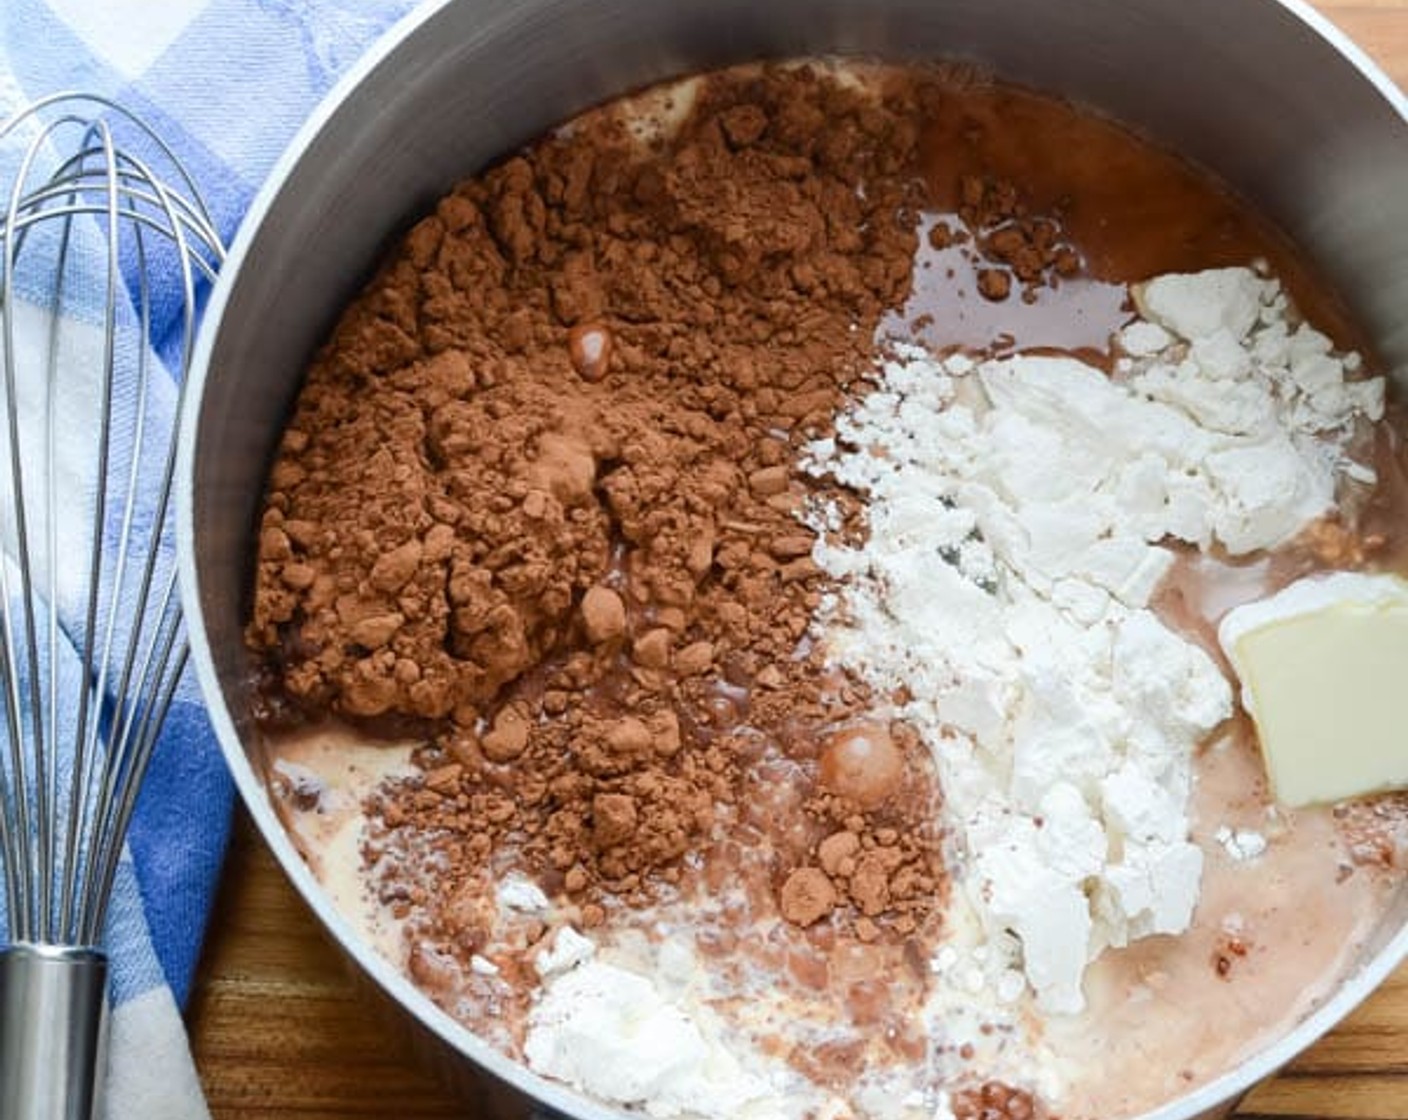 step 1 In a medium saucepan, blend Granulated Sugar (2 cups), All-Purpose Flour (1/3 cup), Salt (1/2 tsp), Instant Espresso Powder (1 Tbsp), and Unsweetened Cocoa Powder (2/3 cup). Add Evaporated Milk (1 can), Water (1/2 cup), and Butter (2 Tbsp).